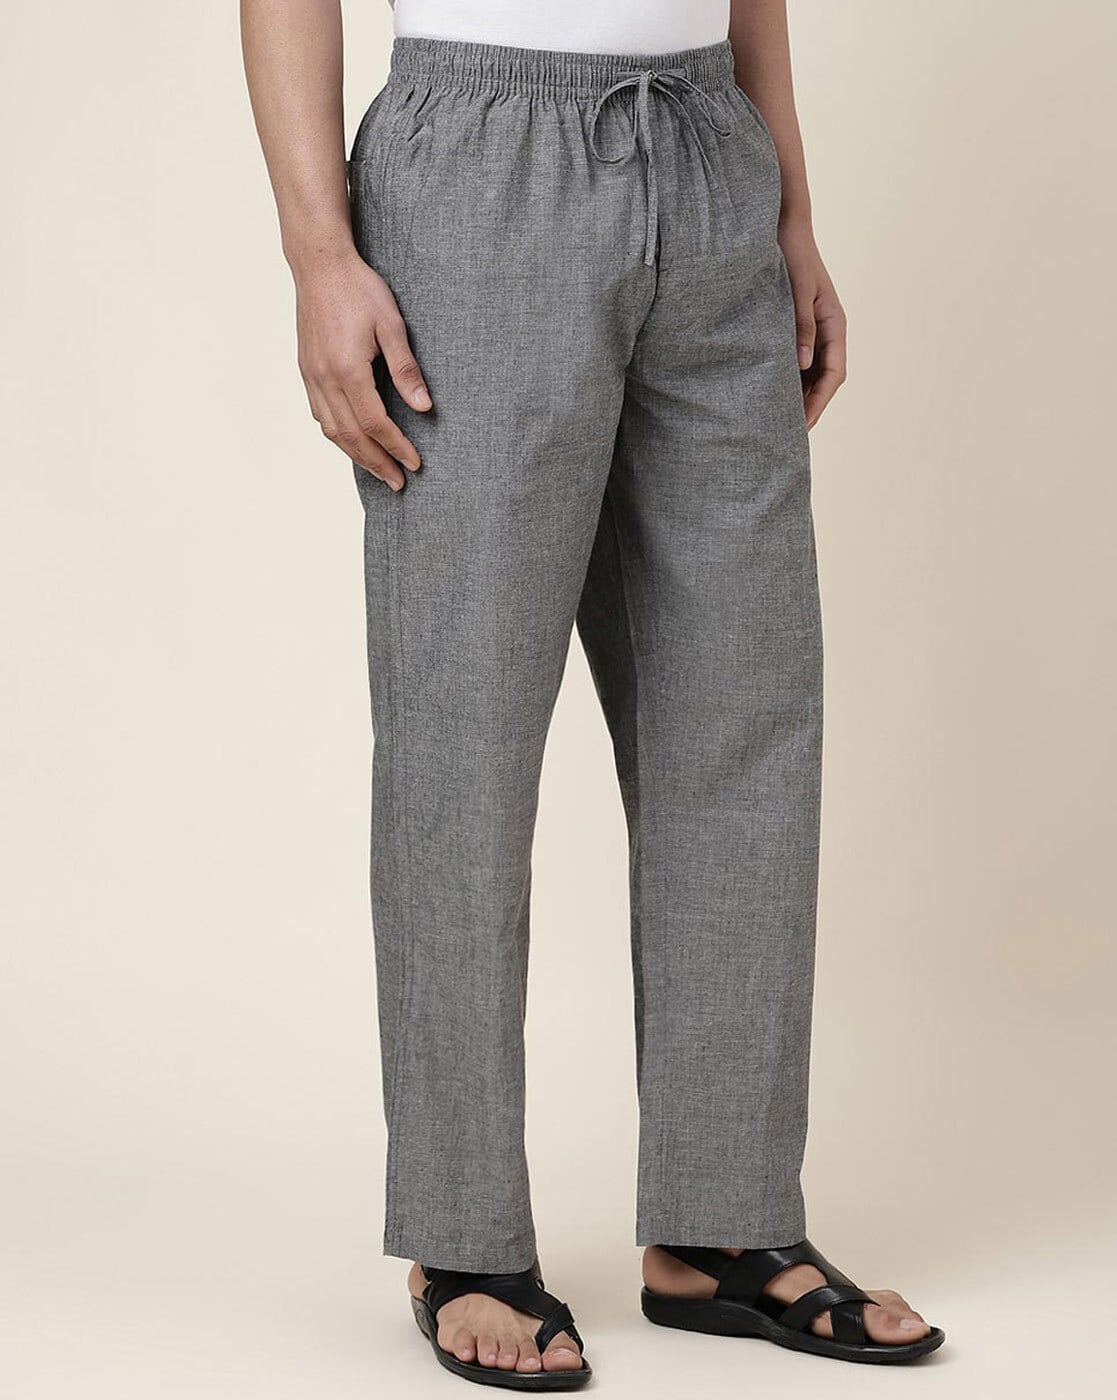 Men's Trousers | Made To Measure | Tailored - Godwin Charli